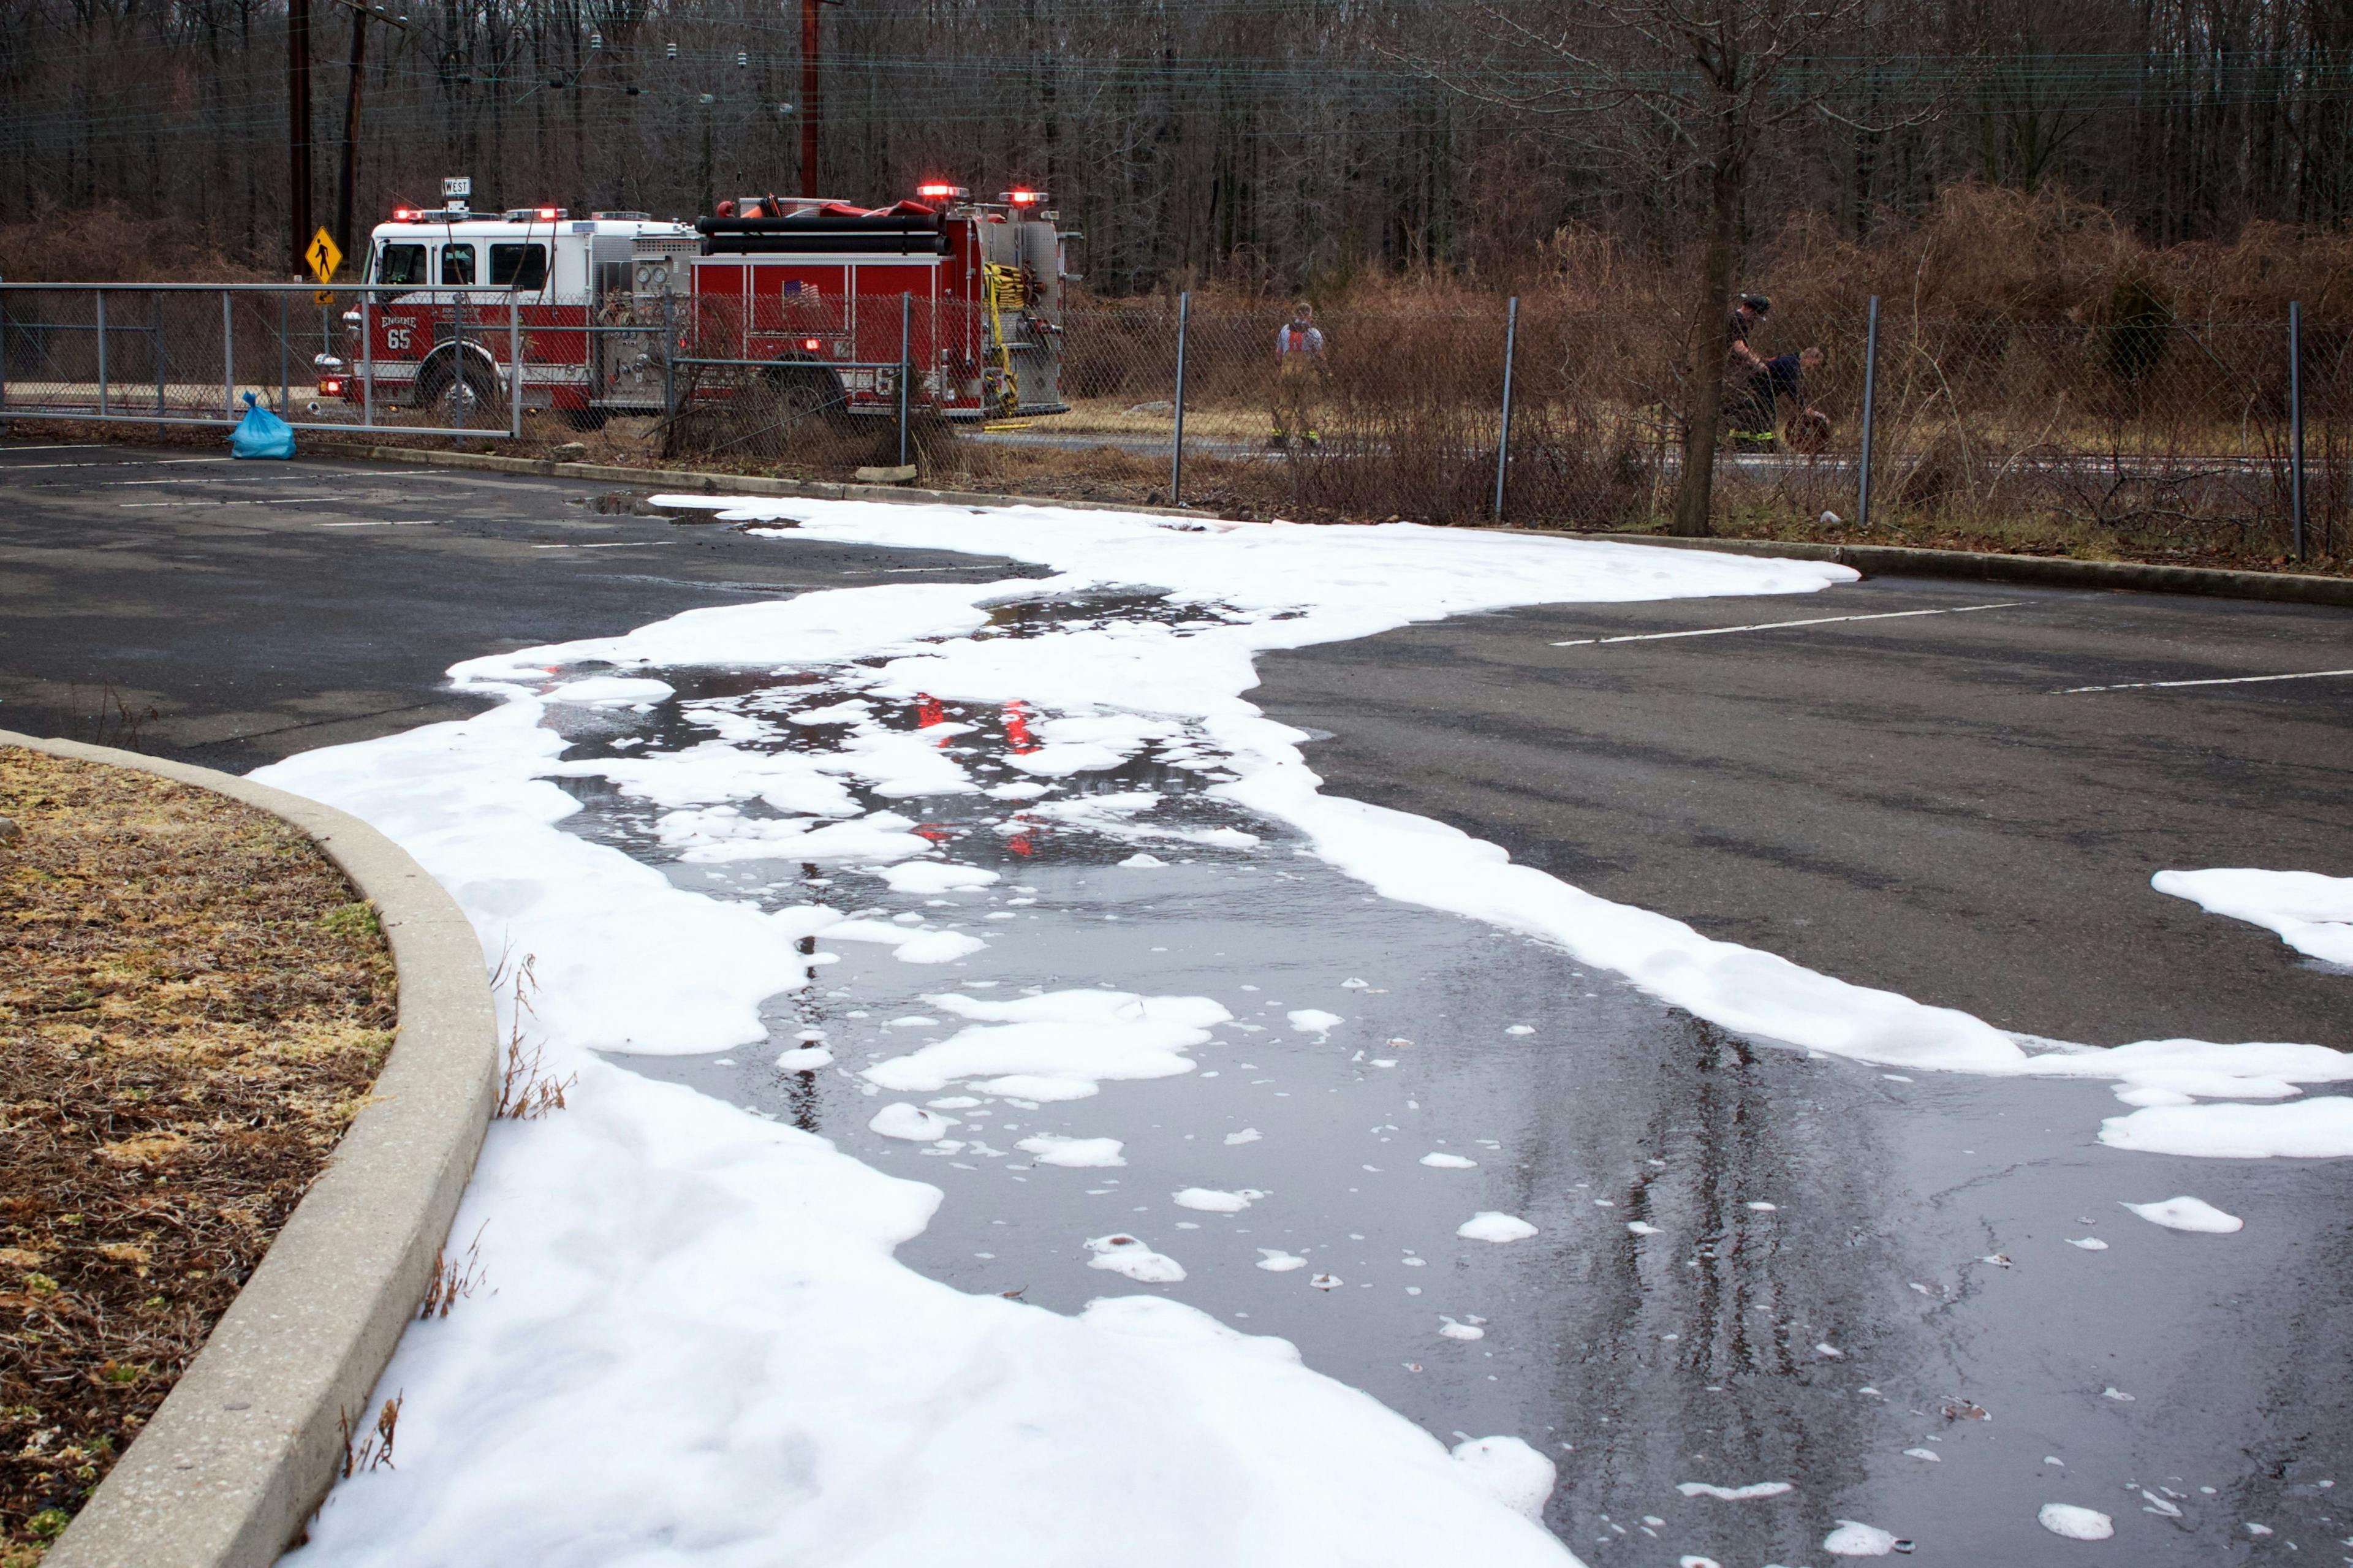 Firefighting foam remains on the ground surface following a tanker truck accident. | Image Credit: © Jana